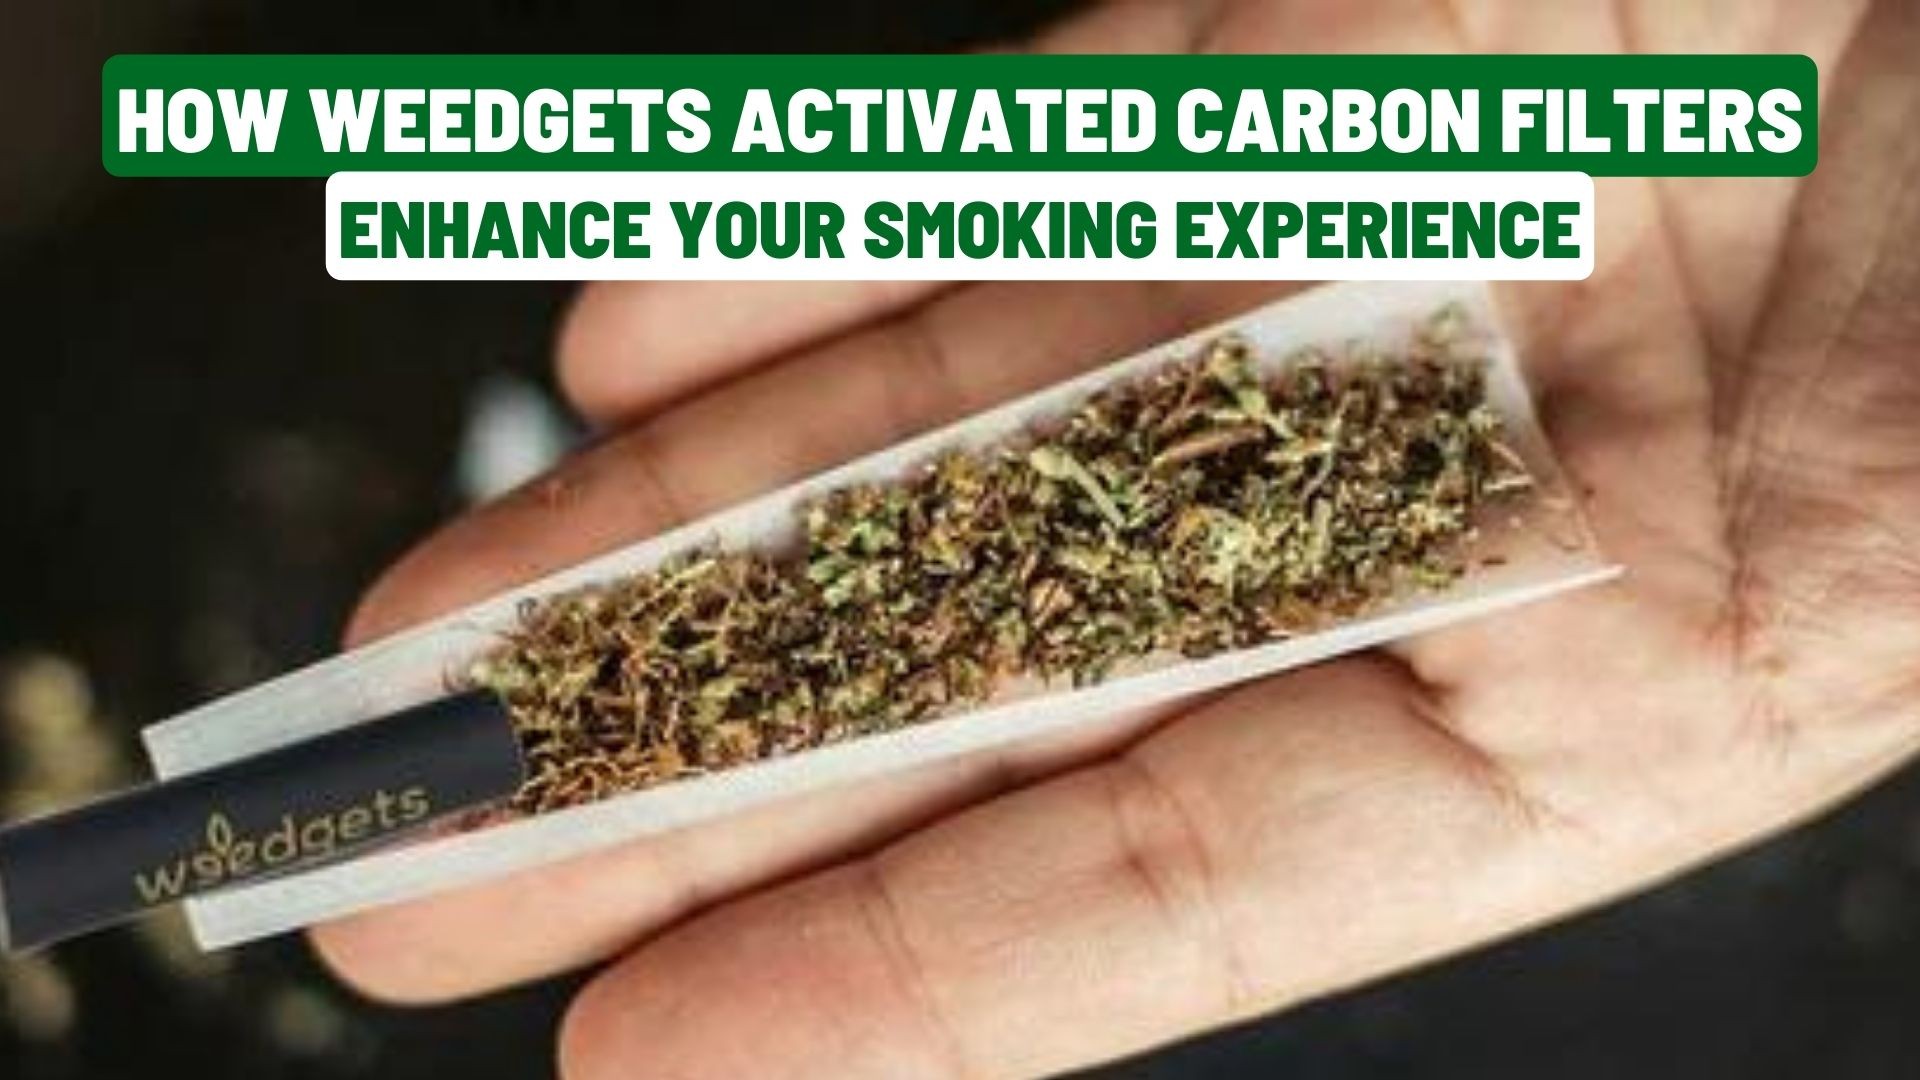 How Weedgets Activated Carbon Filters Enhance Your Smoking Experience